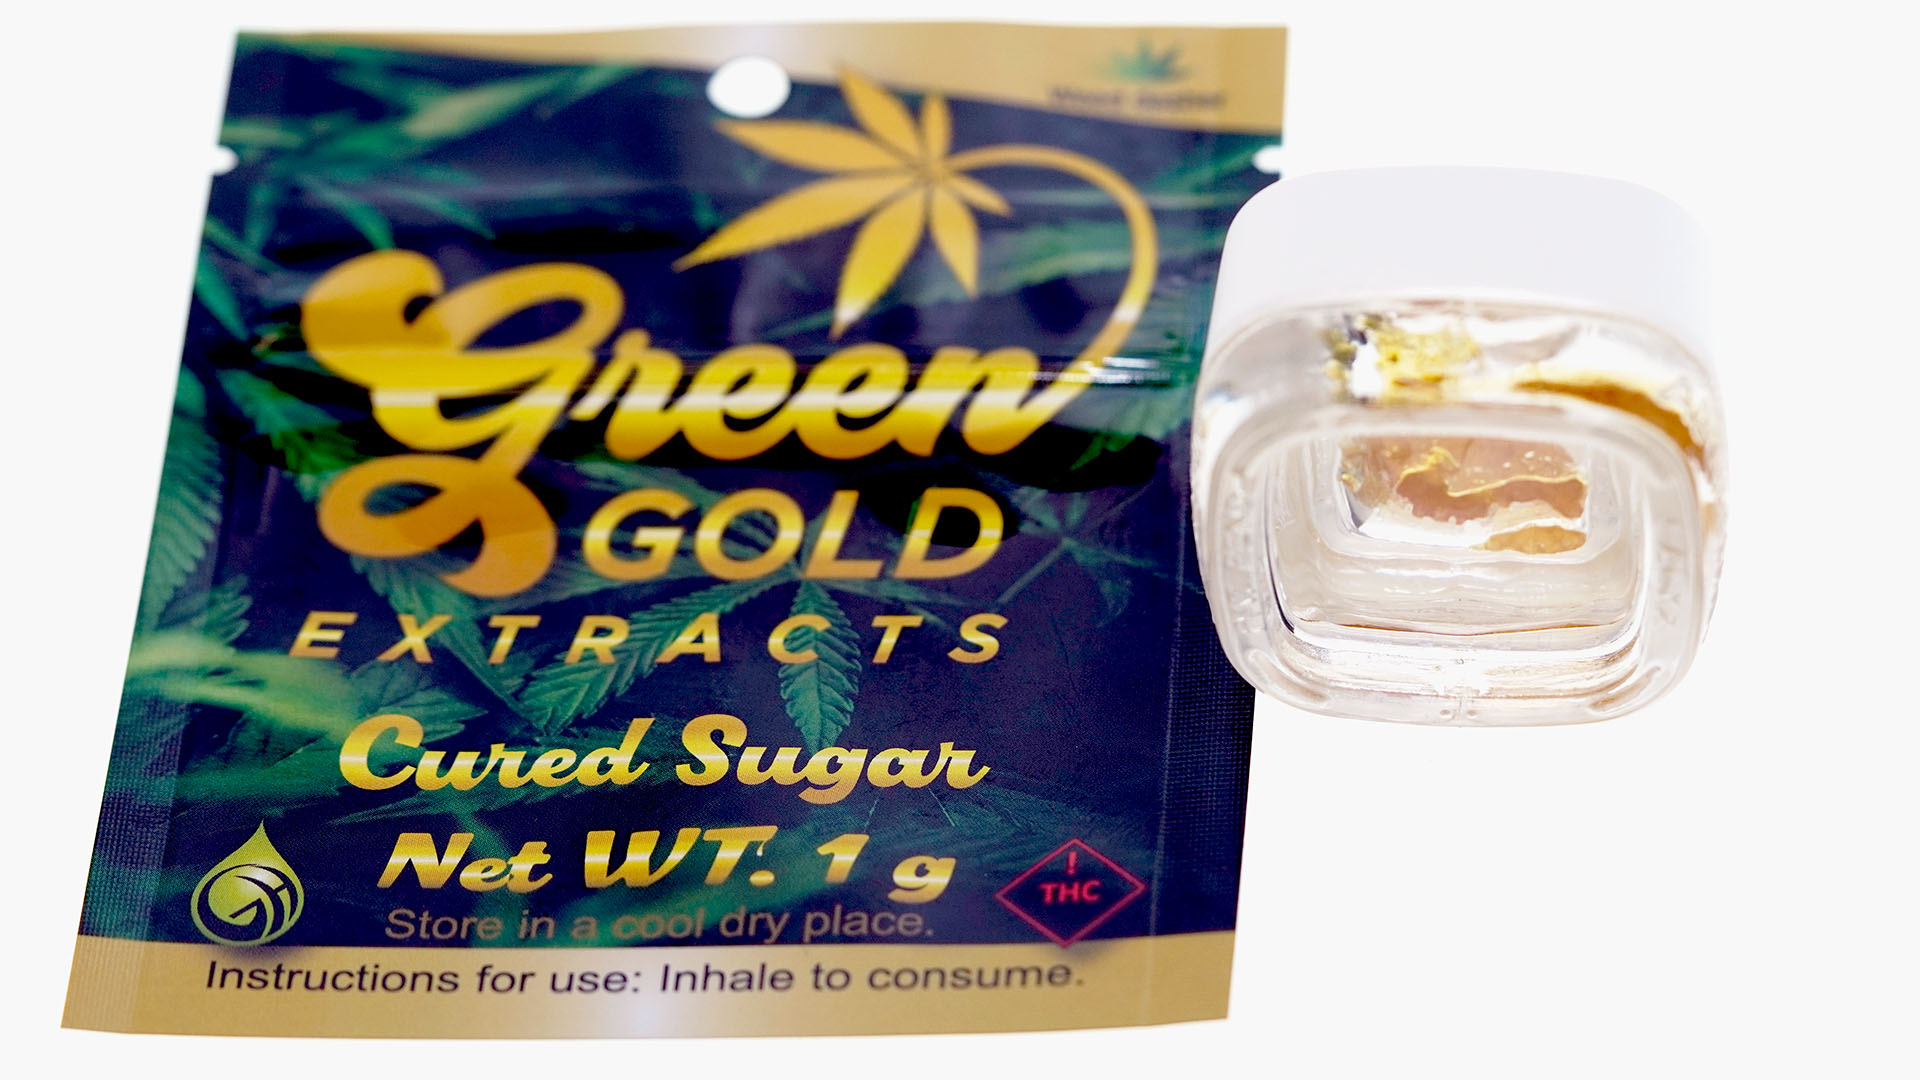 Green Gold Extracts Cured Sugar